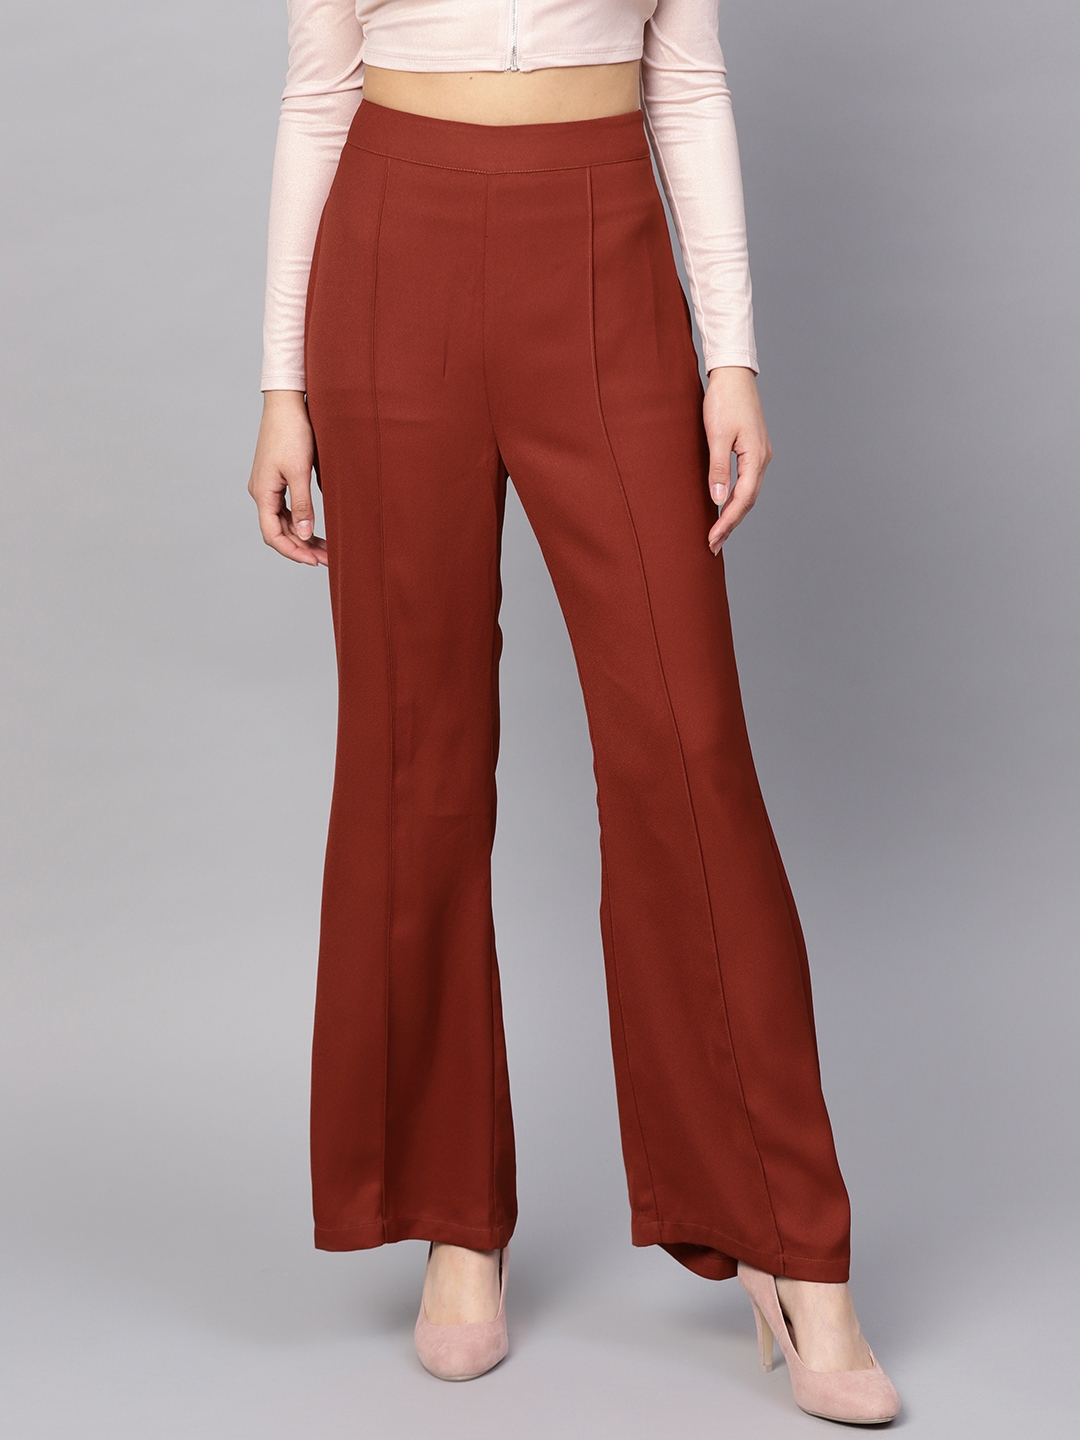 Solid Color Cotton Silk Pant in Rust  BJG47